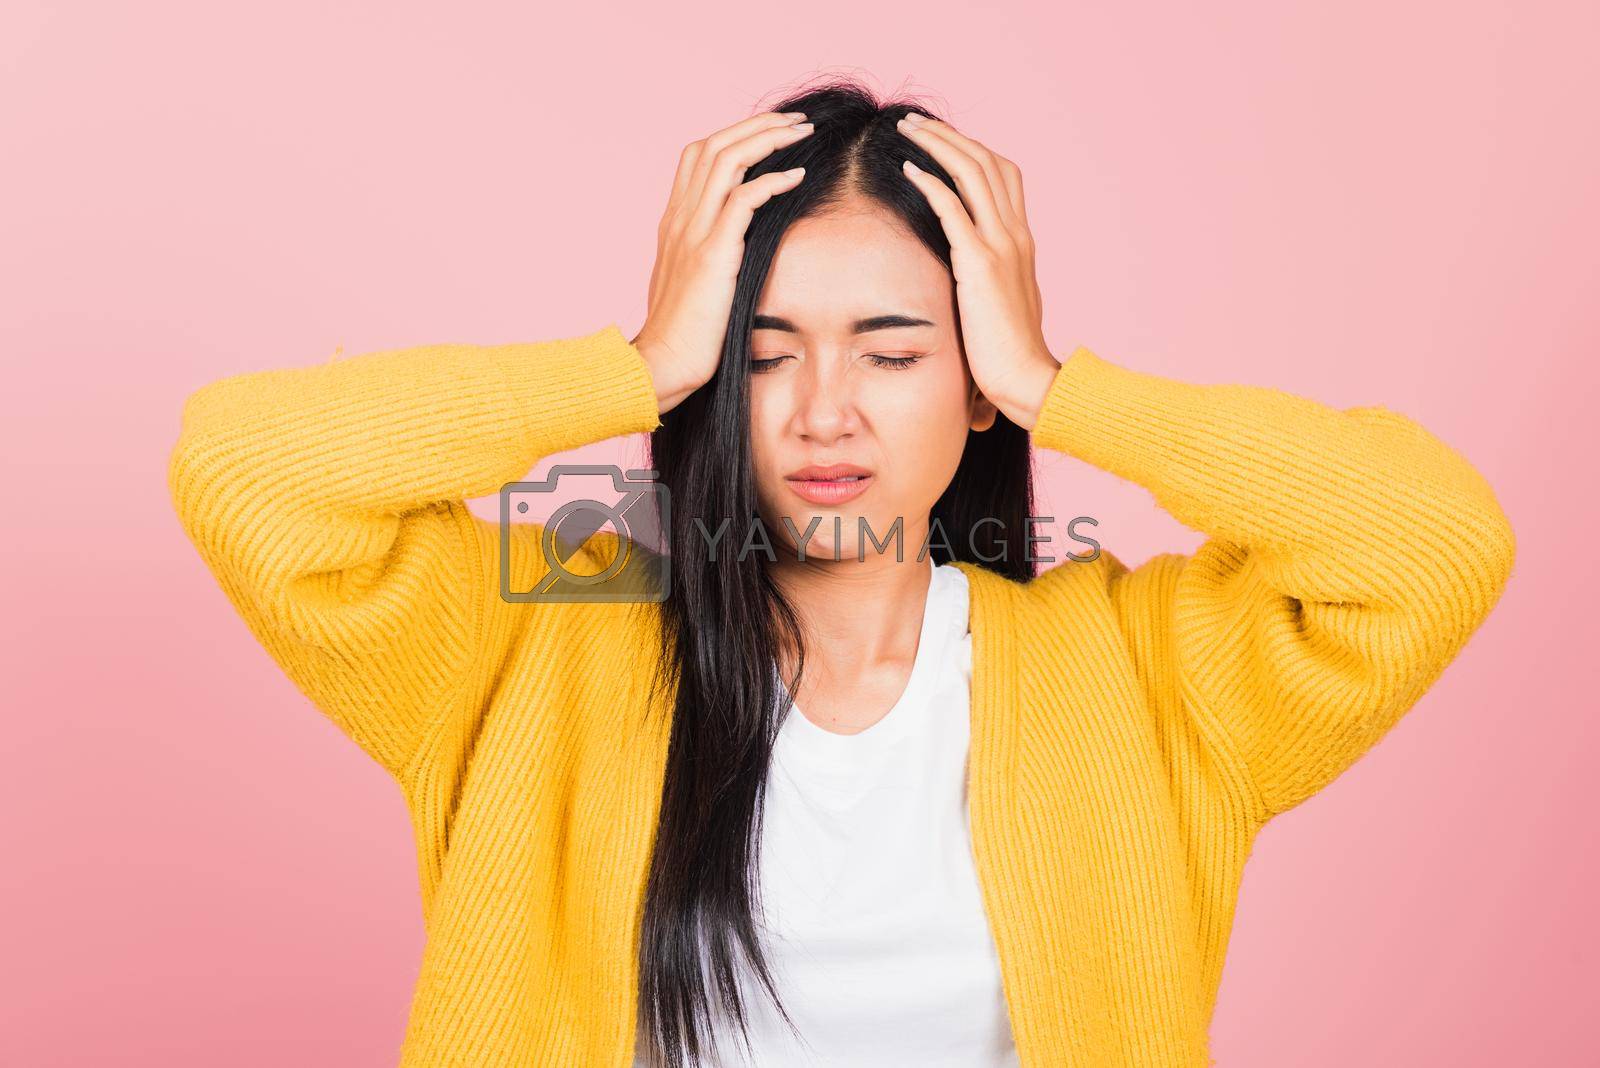 Royalty free image of woman sad tired strain face holding hold head by hands by Sorapop